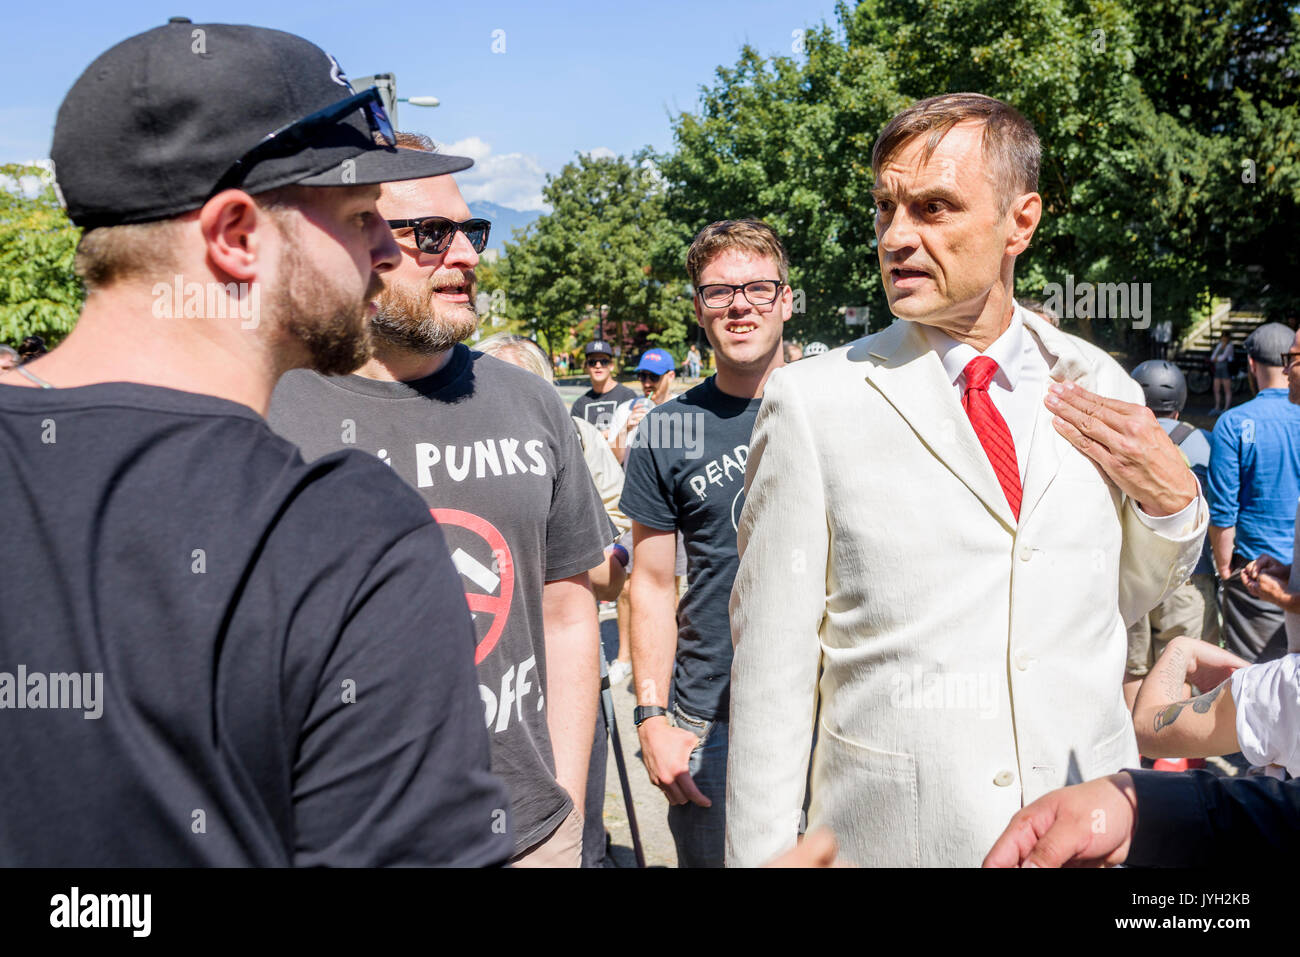 Vancouver, Canada. 19th Aug, 2017. Self professed nazi has nazi button ripped from jacket at Anti-Racism rally, City Hall, Vancouver, British Columbia, Canada. Credit: Michael Wheatley/Alamy Live News Stock Photo